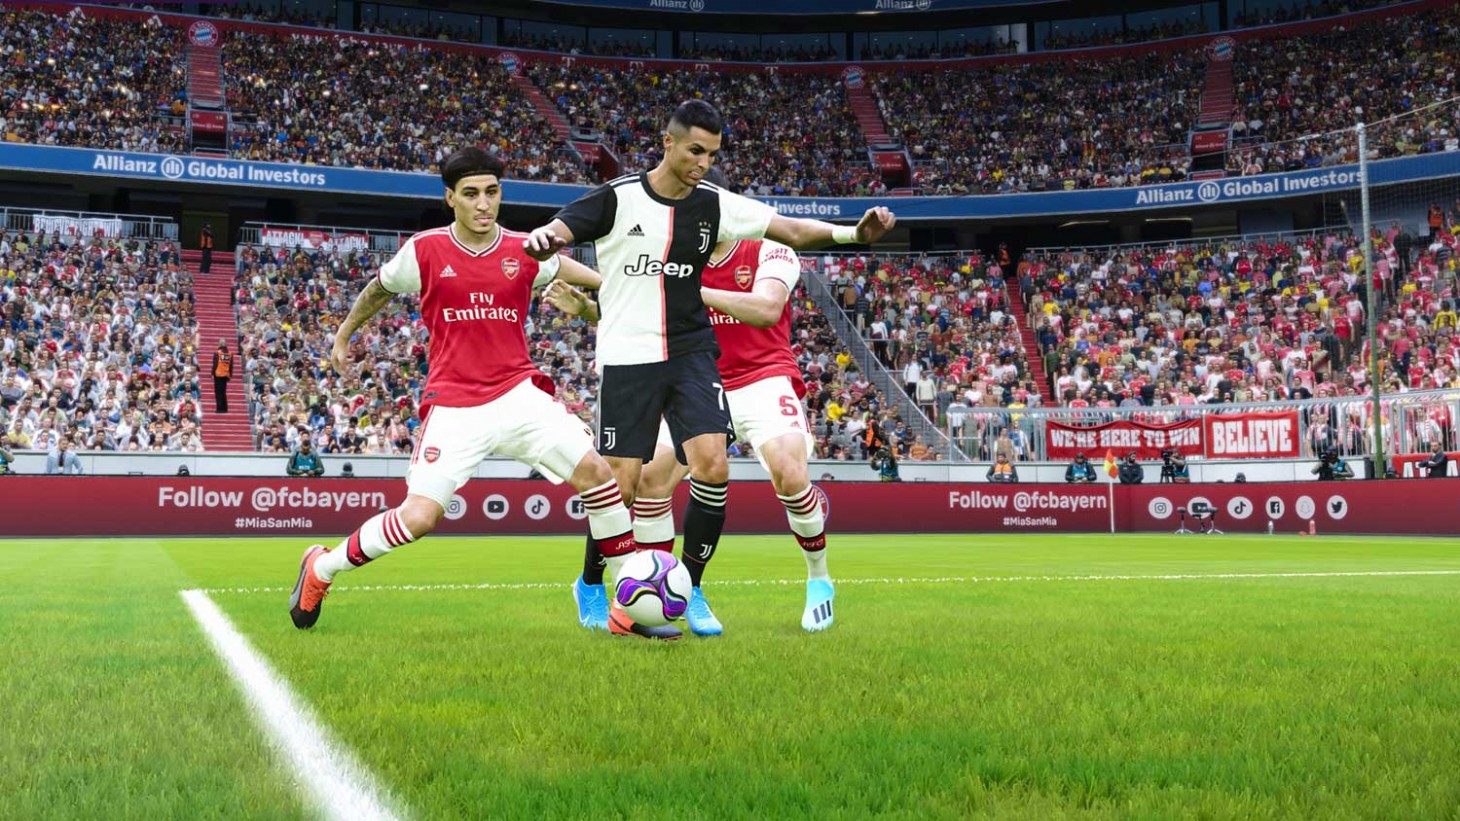 eFootball PES 2020 Demo Isn’t The Same As The Retail Version, Konami Announces PES 2020’s First Big Patch